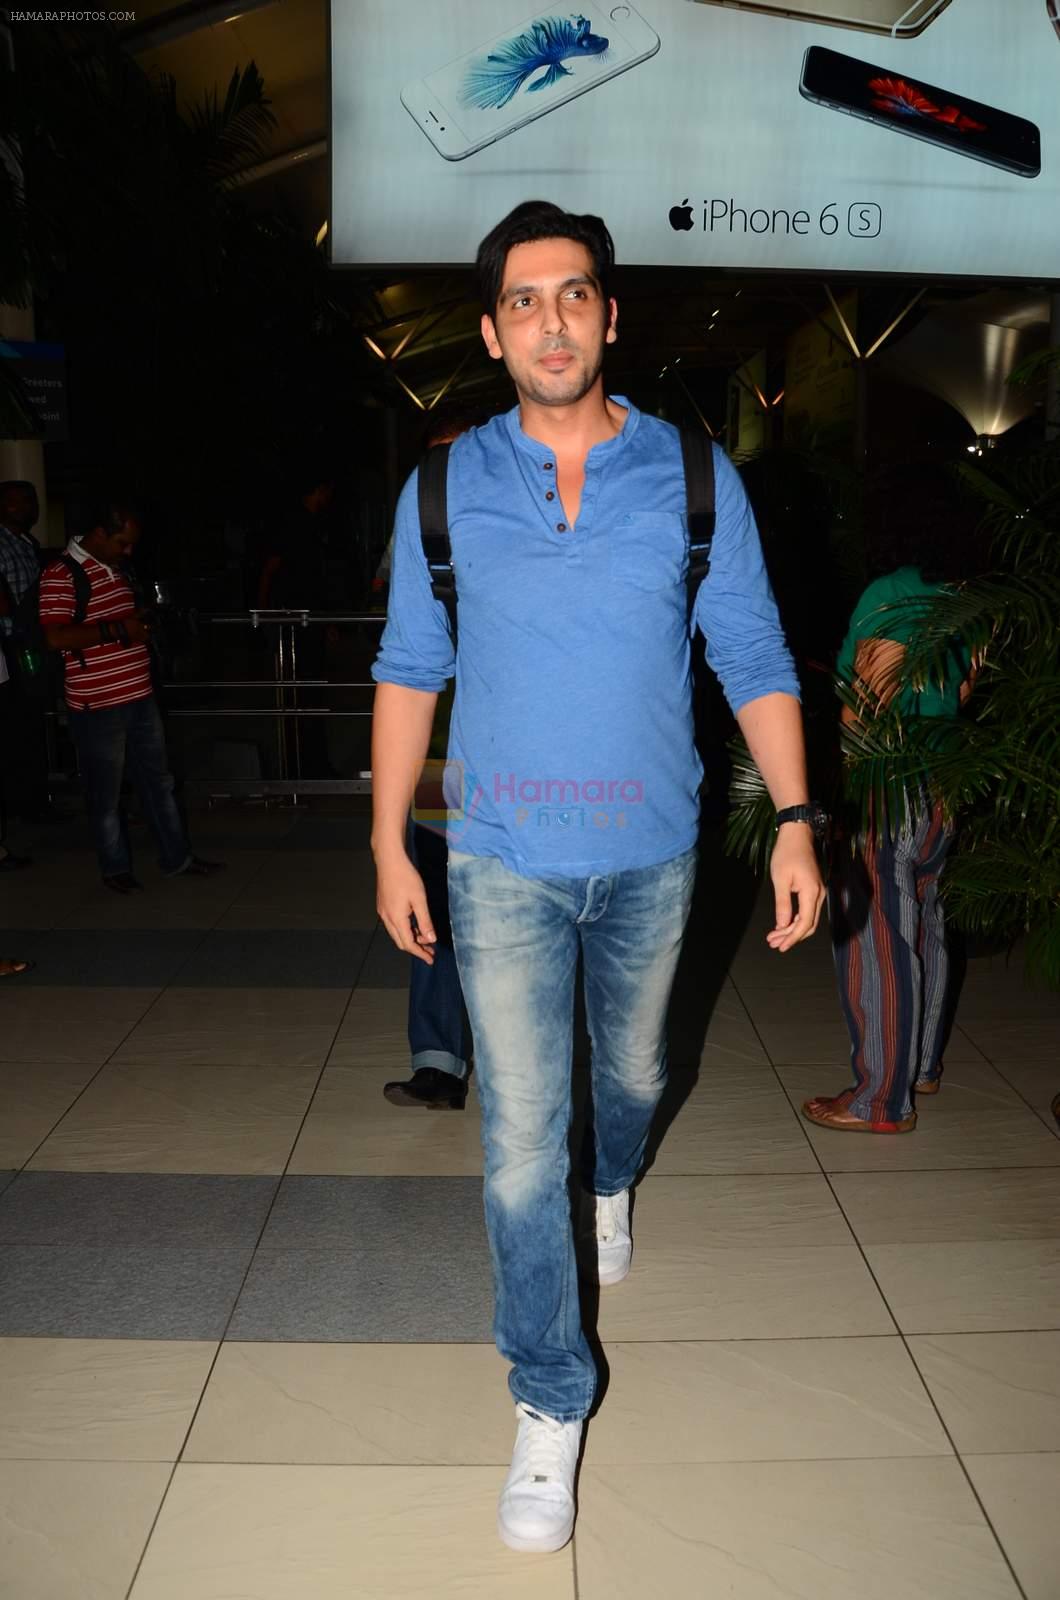 Zayed Khan snapped at airport on 28th Oct 2015